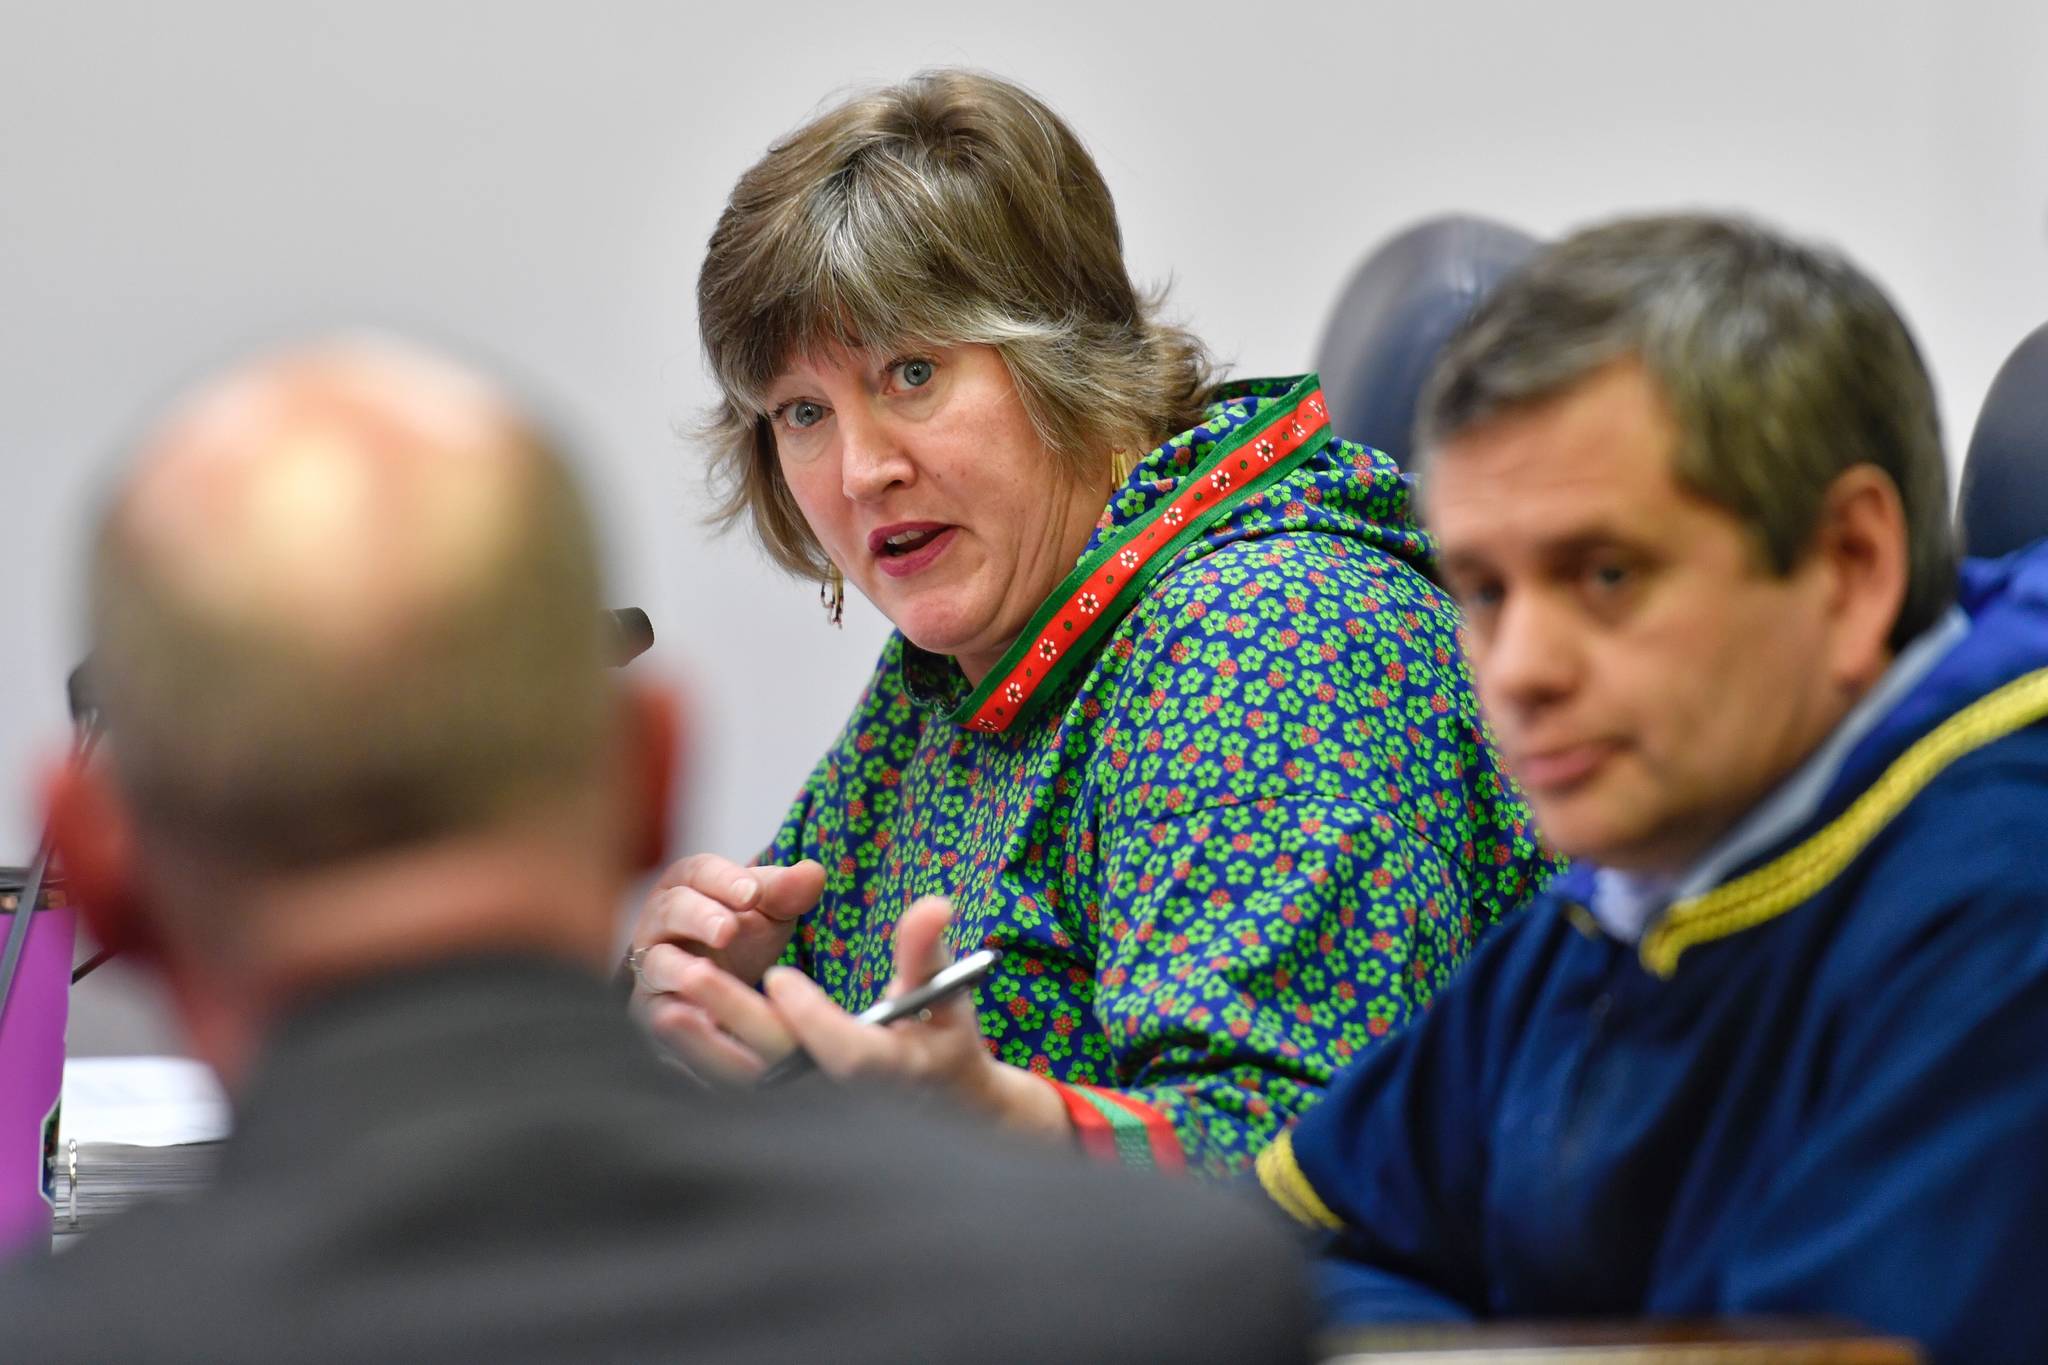 Rep. Sara Hannan, D-Juneau, center, asks a question of Jason Brune, Commissioner designee for the Department of Conservation, as he speaks to the House Resources Committee at the Capitol on Friday, March 14, 2019. Rep. Chris Tuck, D-Anchorage, is left. (Michael Penn | Juneau Empire)